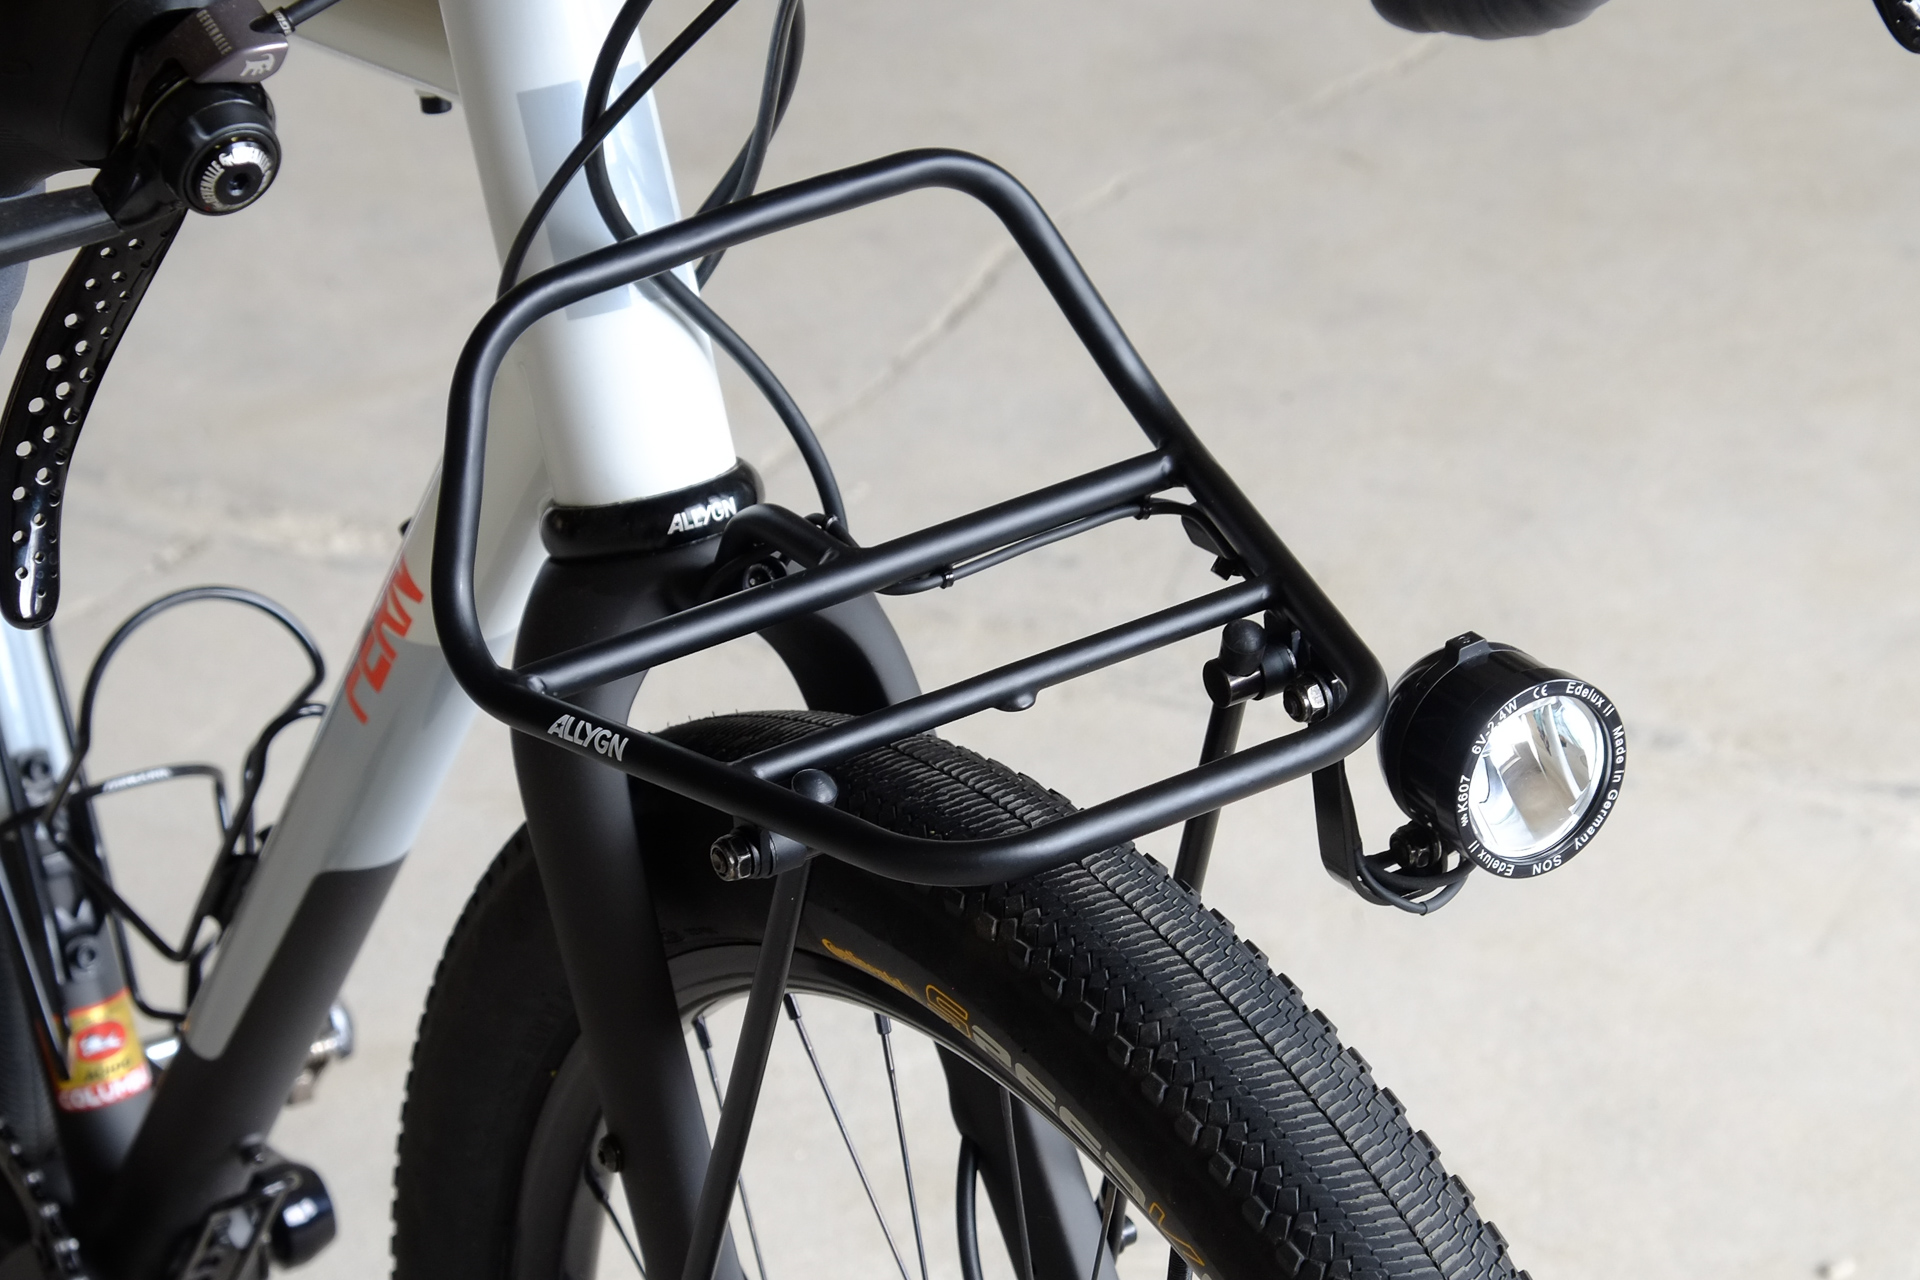 Small and Lightweight Front Racks for Bikepacking 